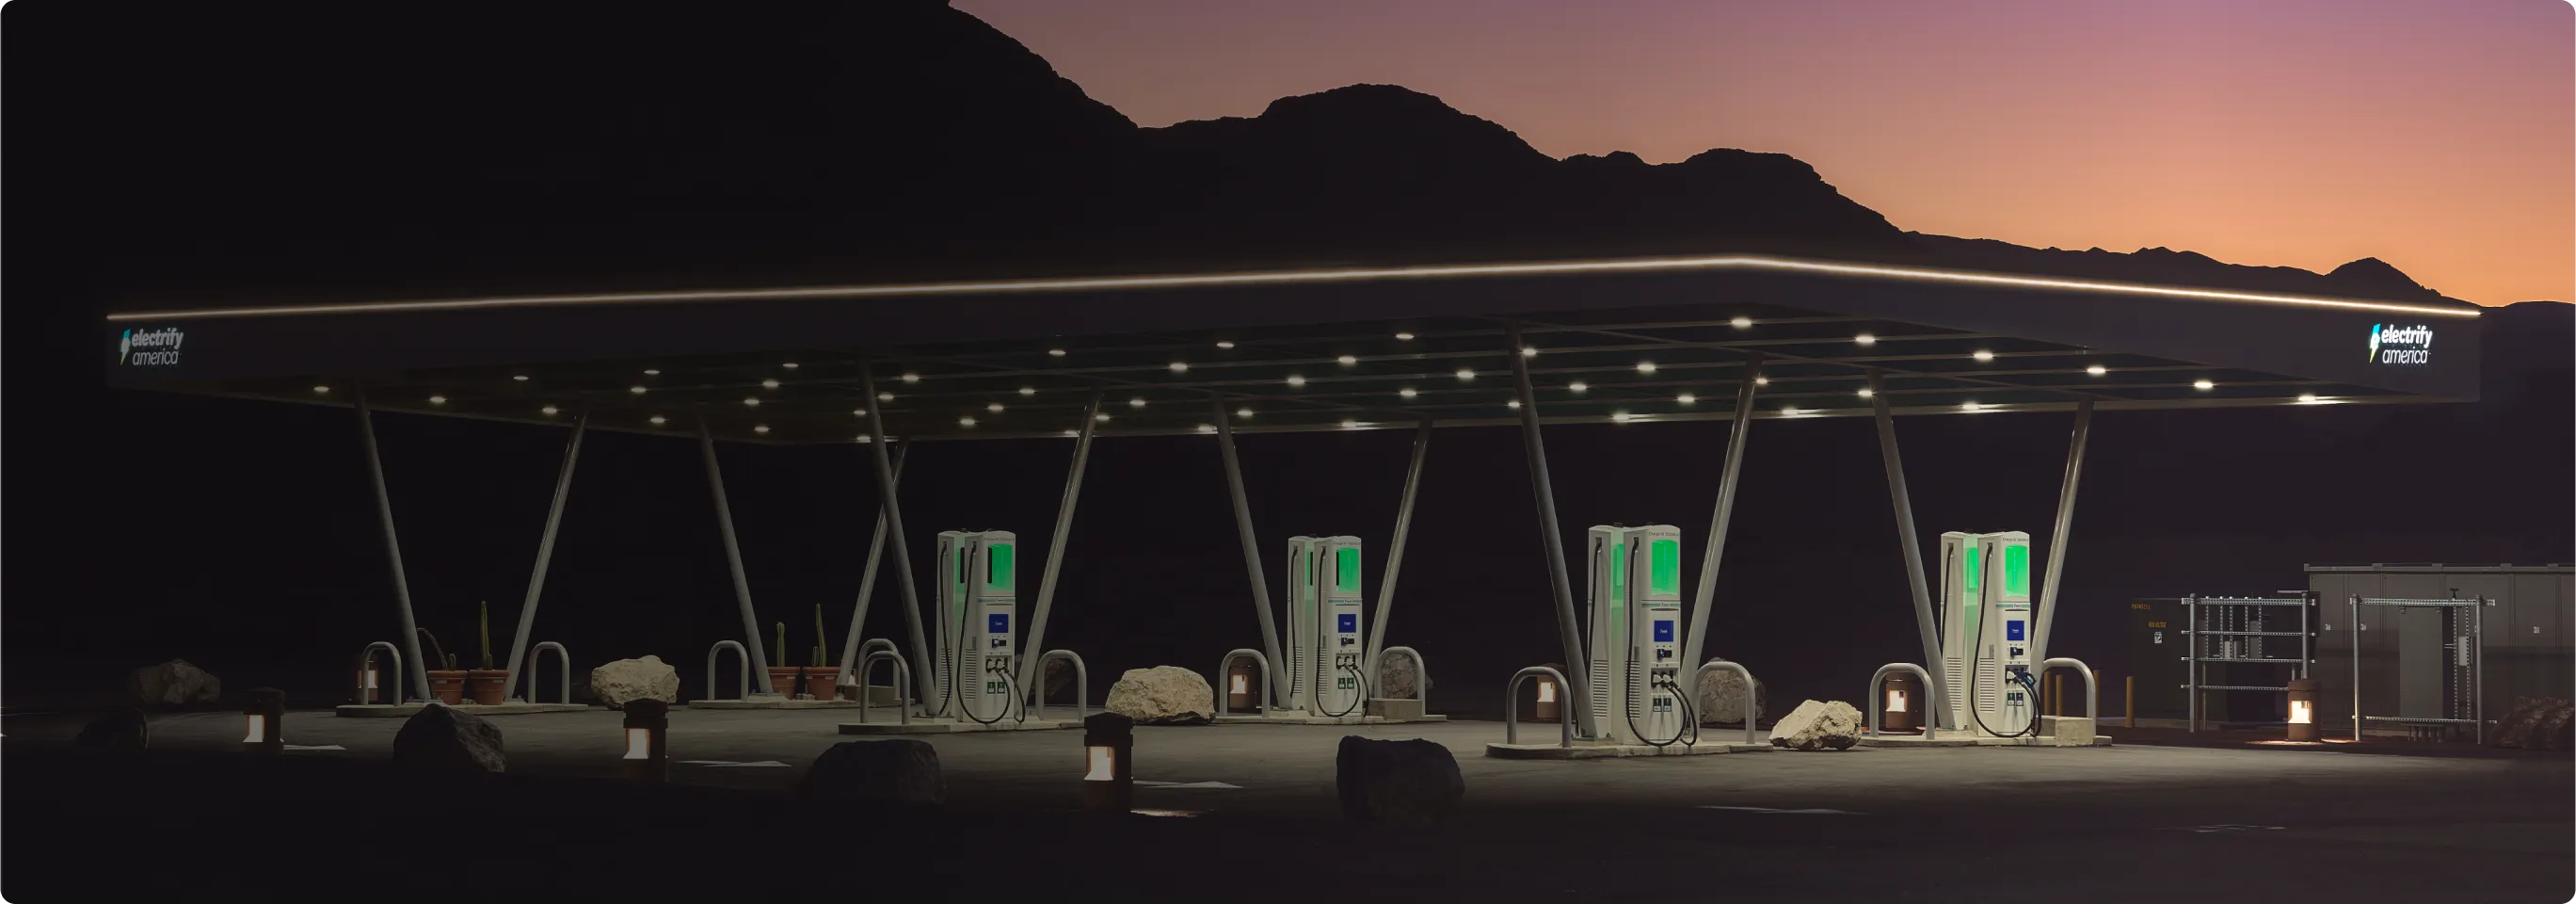 An Electrify America charging station lit up at dusk, four chargers are lined up in two rows of two under a large open-air shelter. In the background is the side of a large mountain and purple darkening sky.